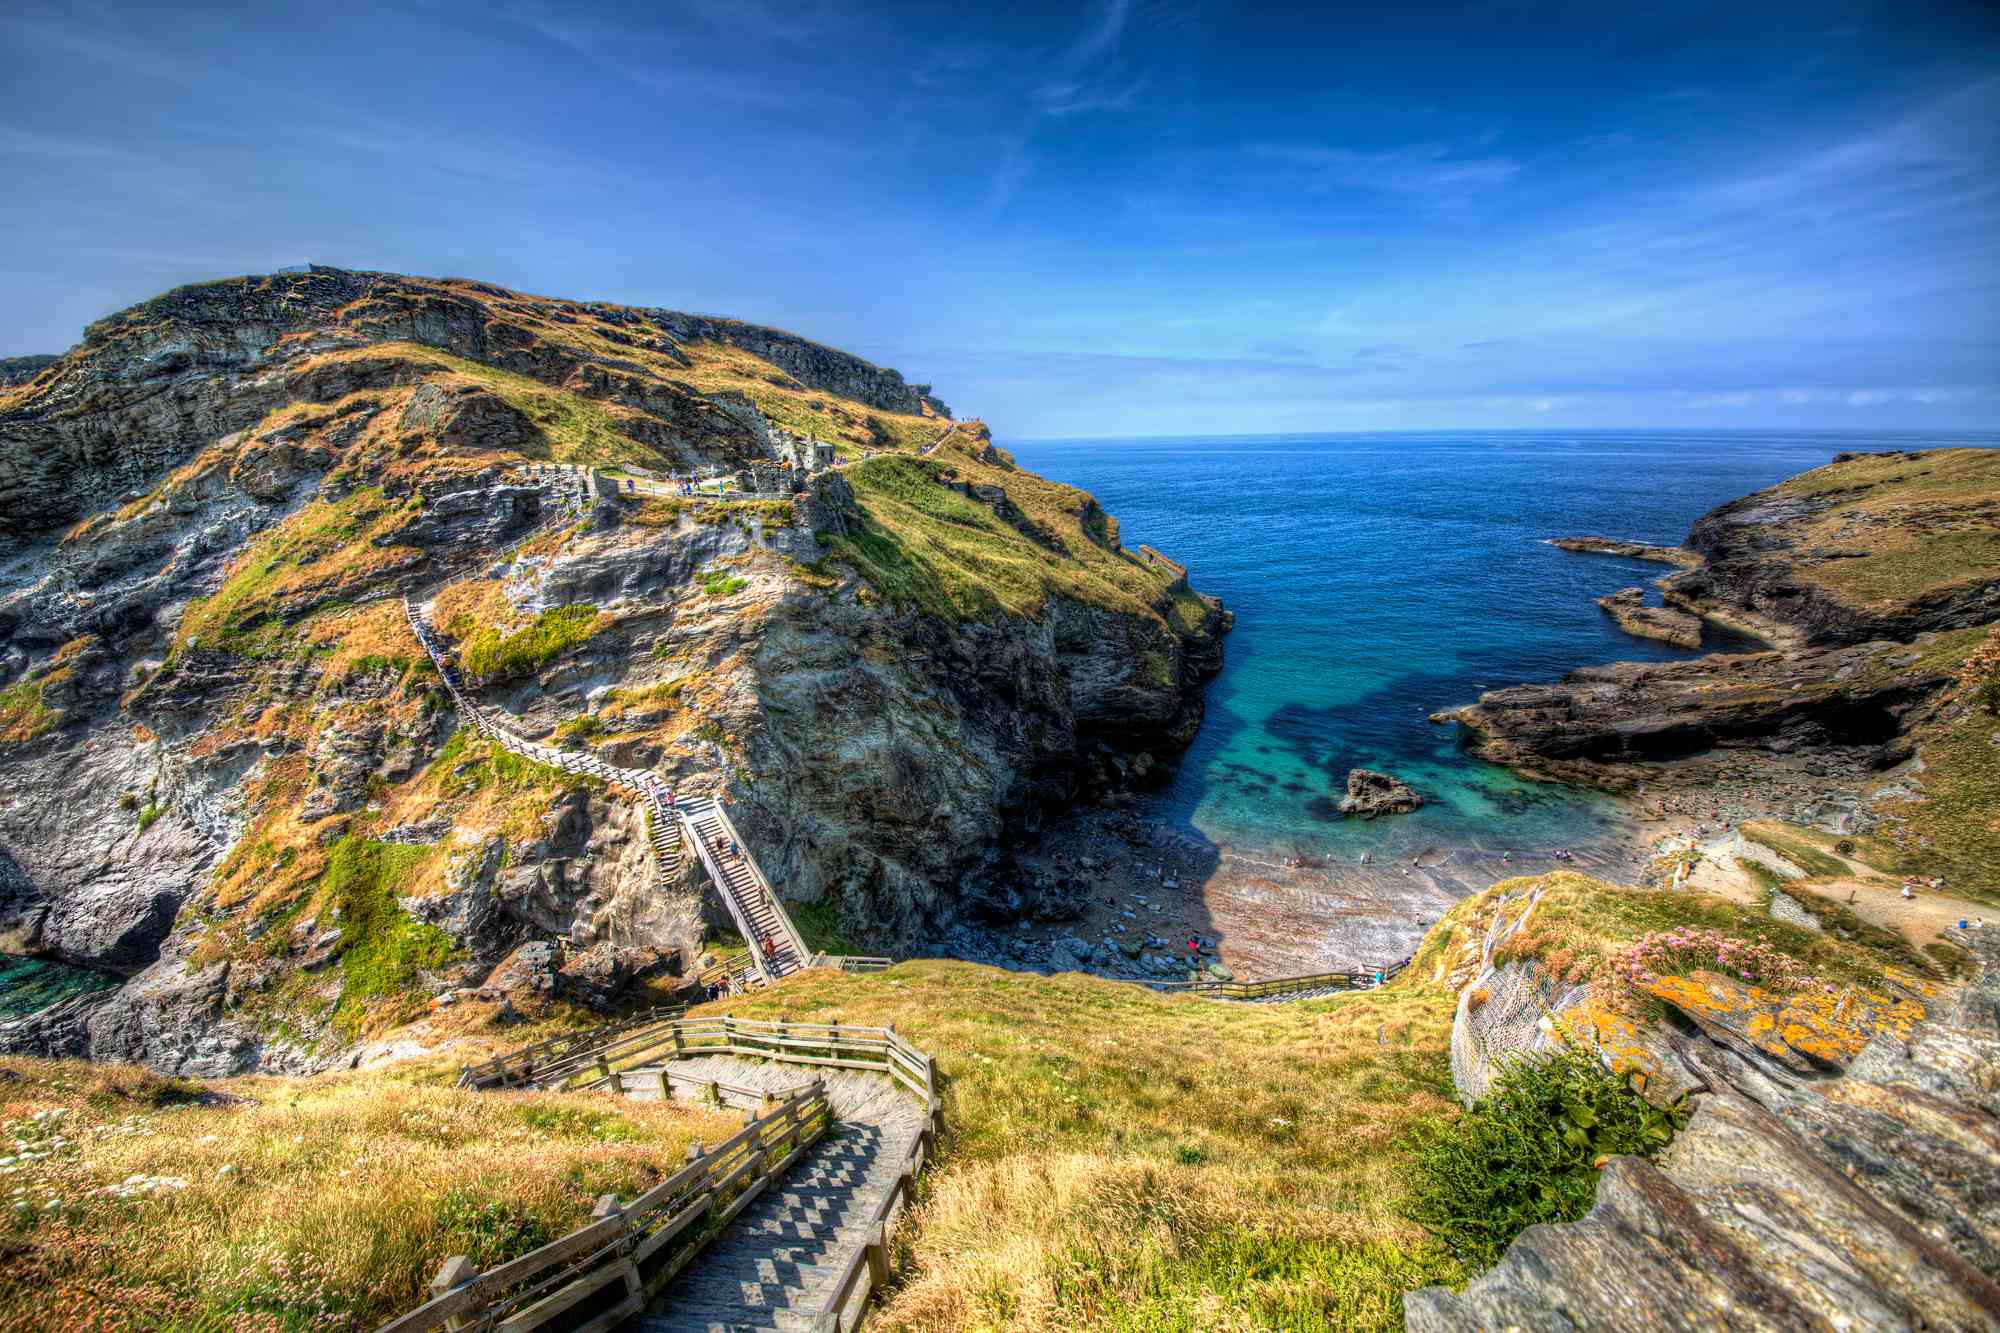 The view of Tintagel Castle in Cornwall